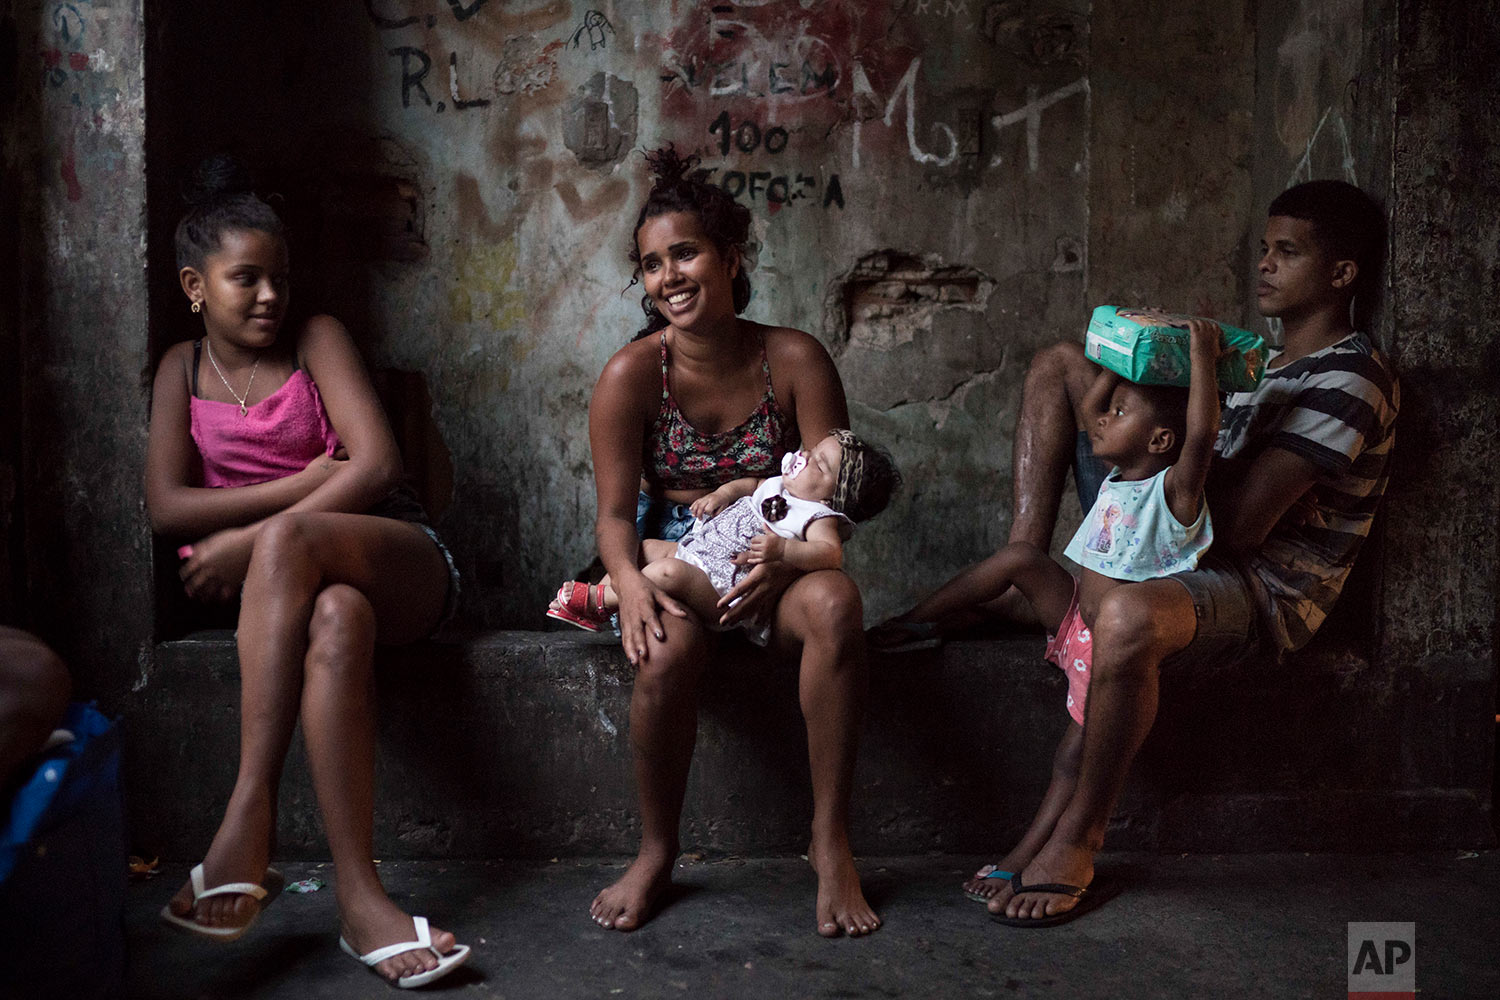  In this Sept. 9, 2017 photo, residents sit in a corridor inside a squatter building that used to house the Brazilian Institute of Geography and Statistics (IBGE) in the Mangueira slum of Rio de Janeiro, Brazil. Despite the hardscrabble existence, there is a strong sense of community among the hundreds of people occupying the building. (AP Photo/Felipe Dana) 